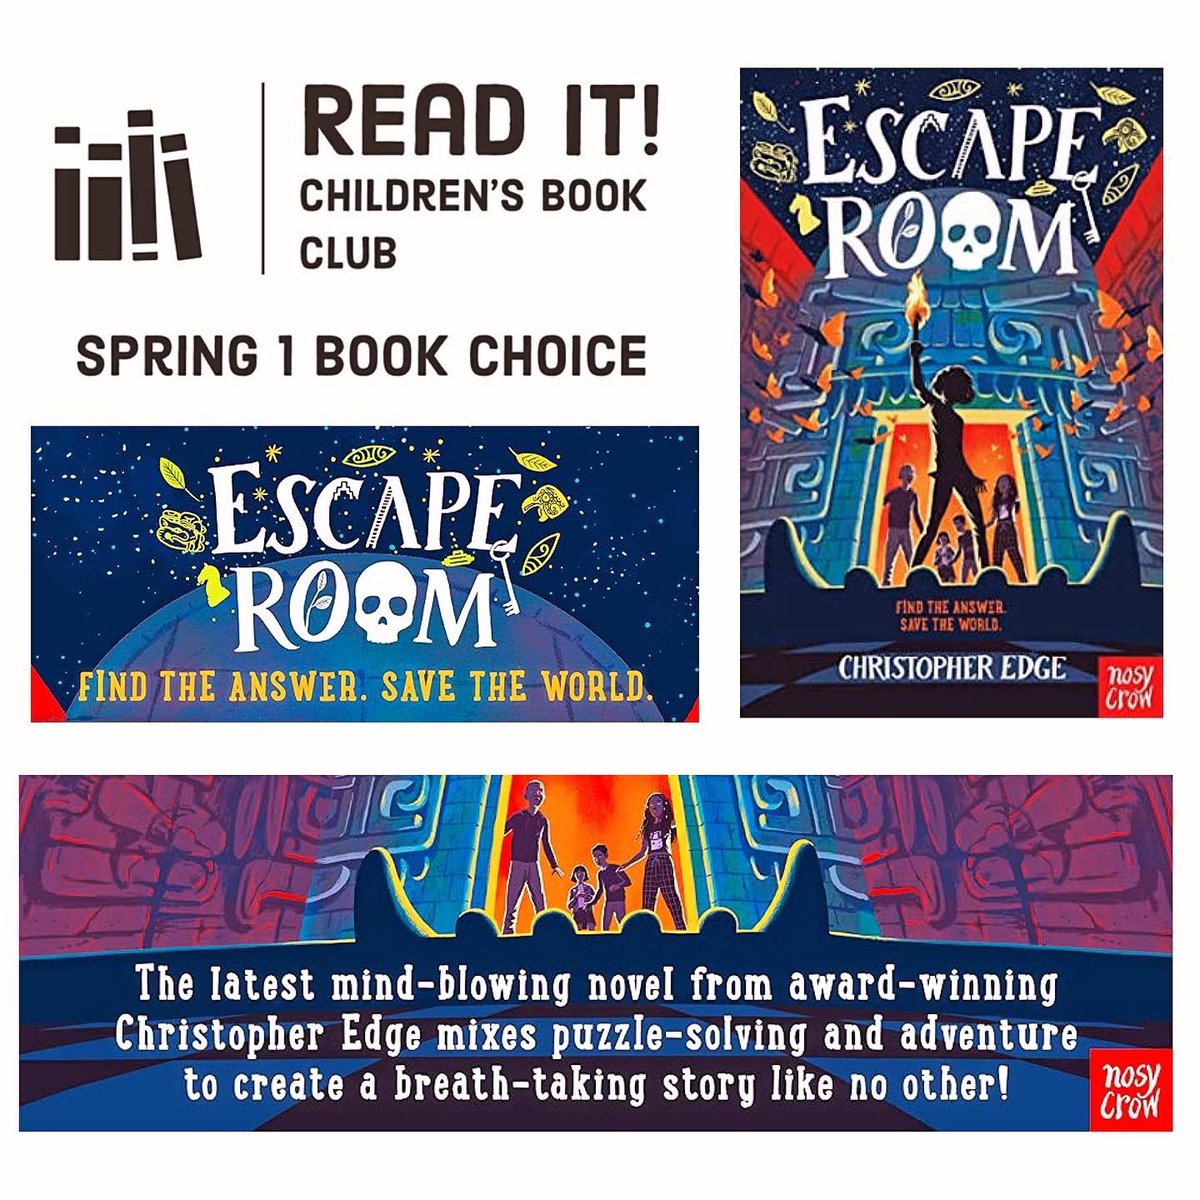 The Spring 1 book choice at Read It! Children’s Book Club will be the amazing Escape Room by Christopher Edge. The children have had a sneaky peek already and given it the thumbs up! 👍 @edgechristopher @NosyCrowBooks